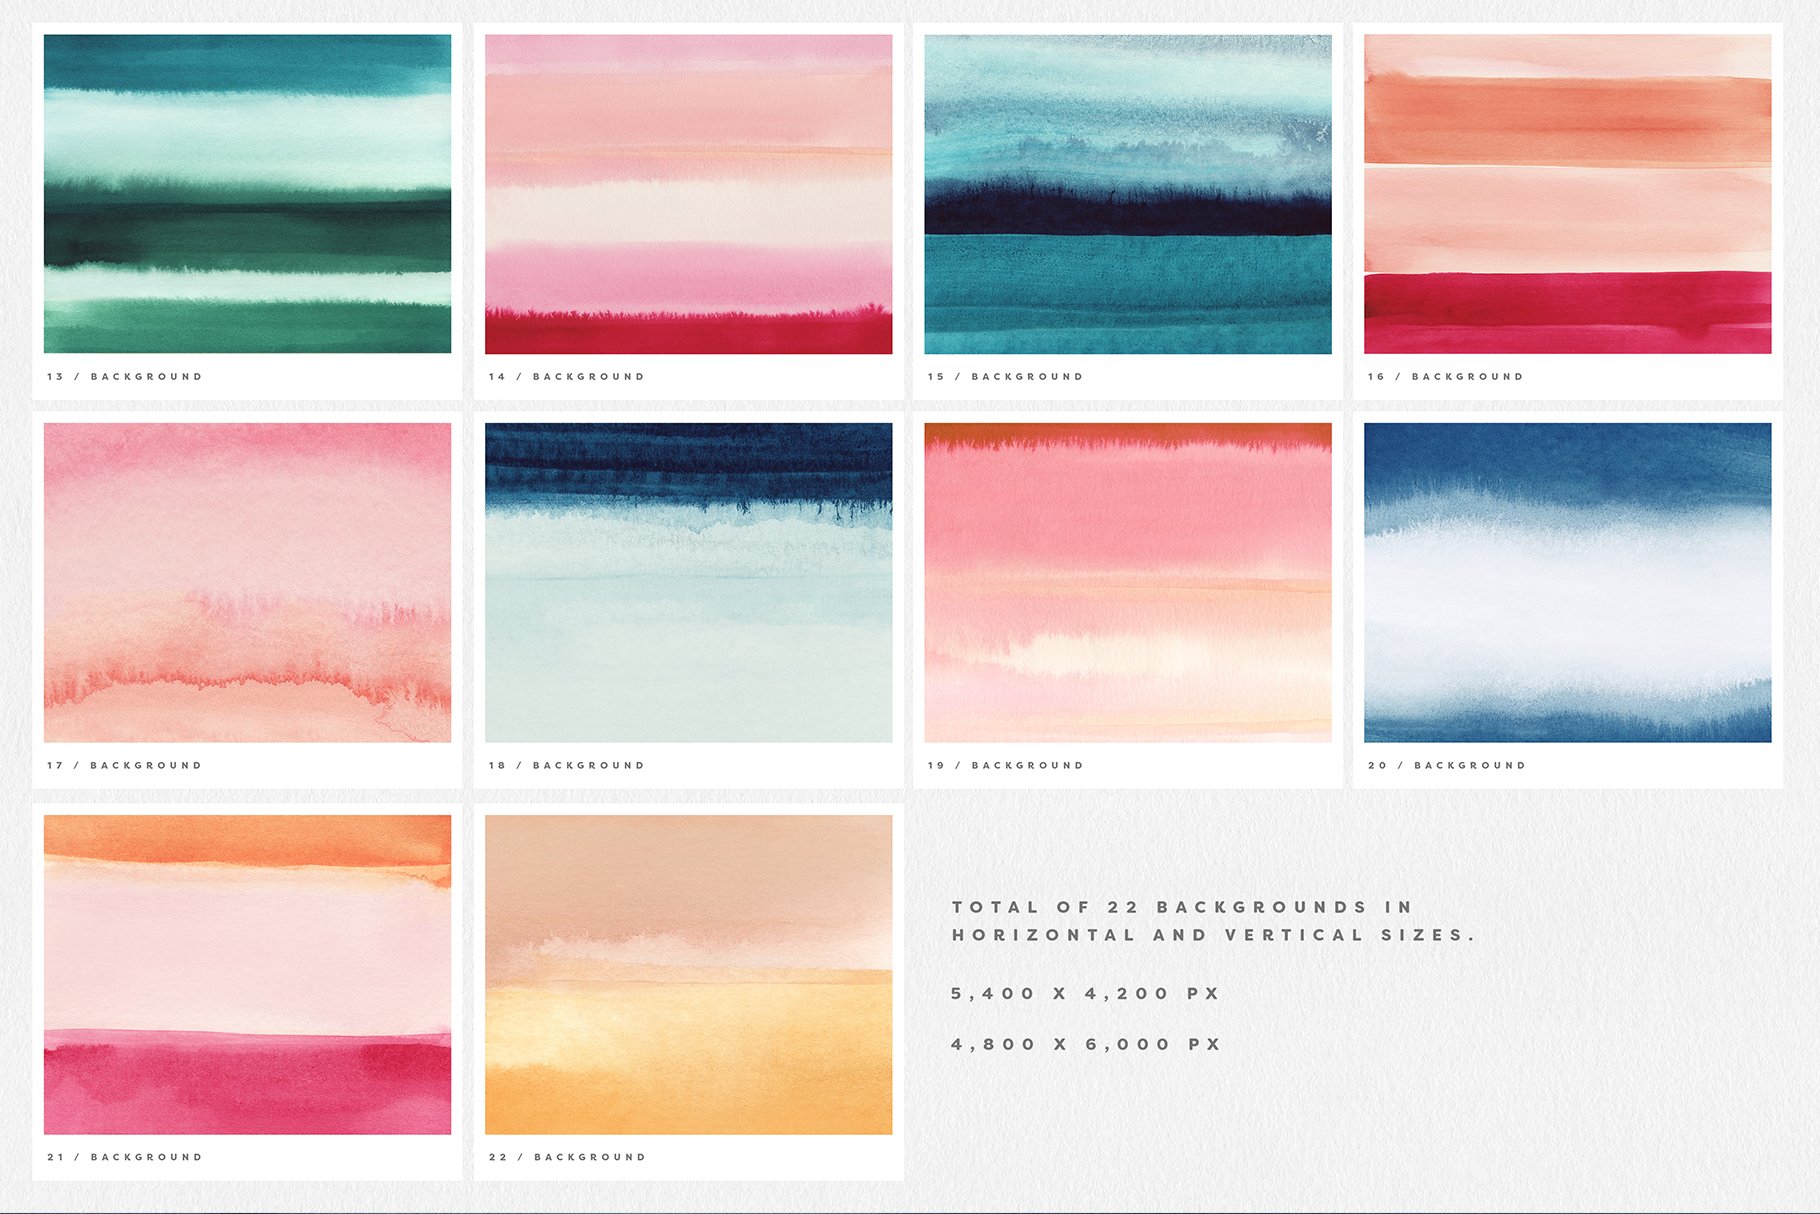 Total of 22 backgrounds in horizontal and vertical backgrounds.